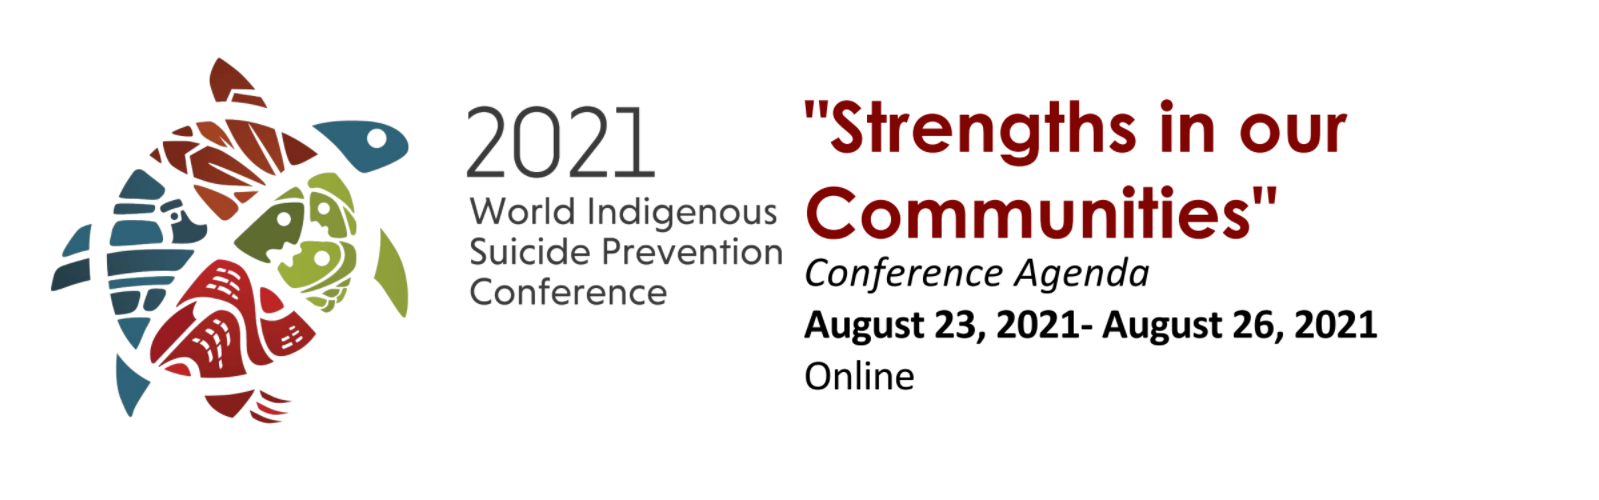 2021 World Indigenous Suicide Prevention Conference - "Strengths in our Communities" Conference Agenda - August 23, 2021 - August 26, 2021 - Online